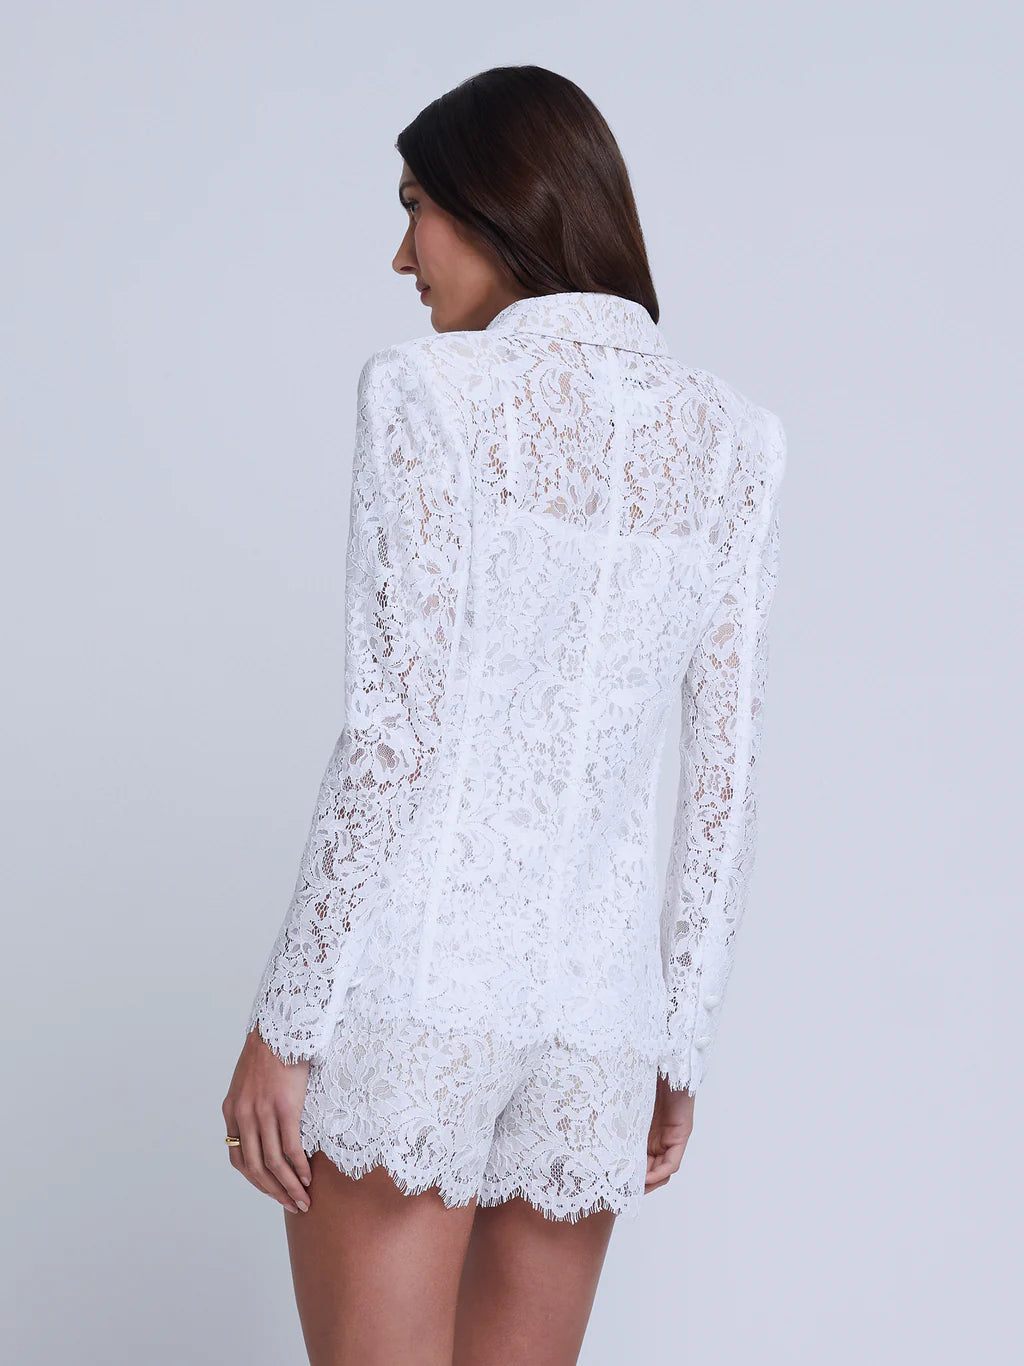 Clementine Blazer in White Lace by L'AGENCE